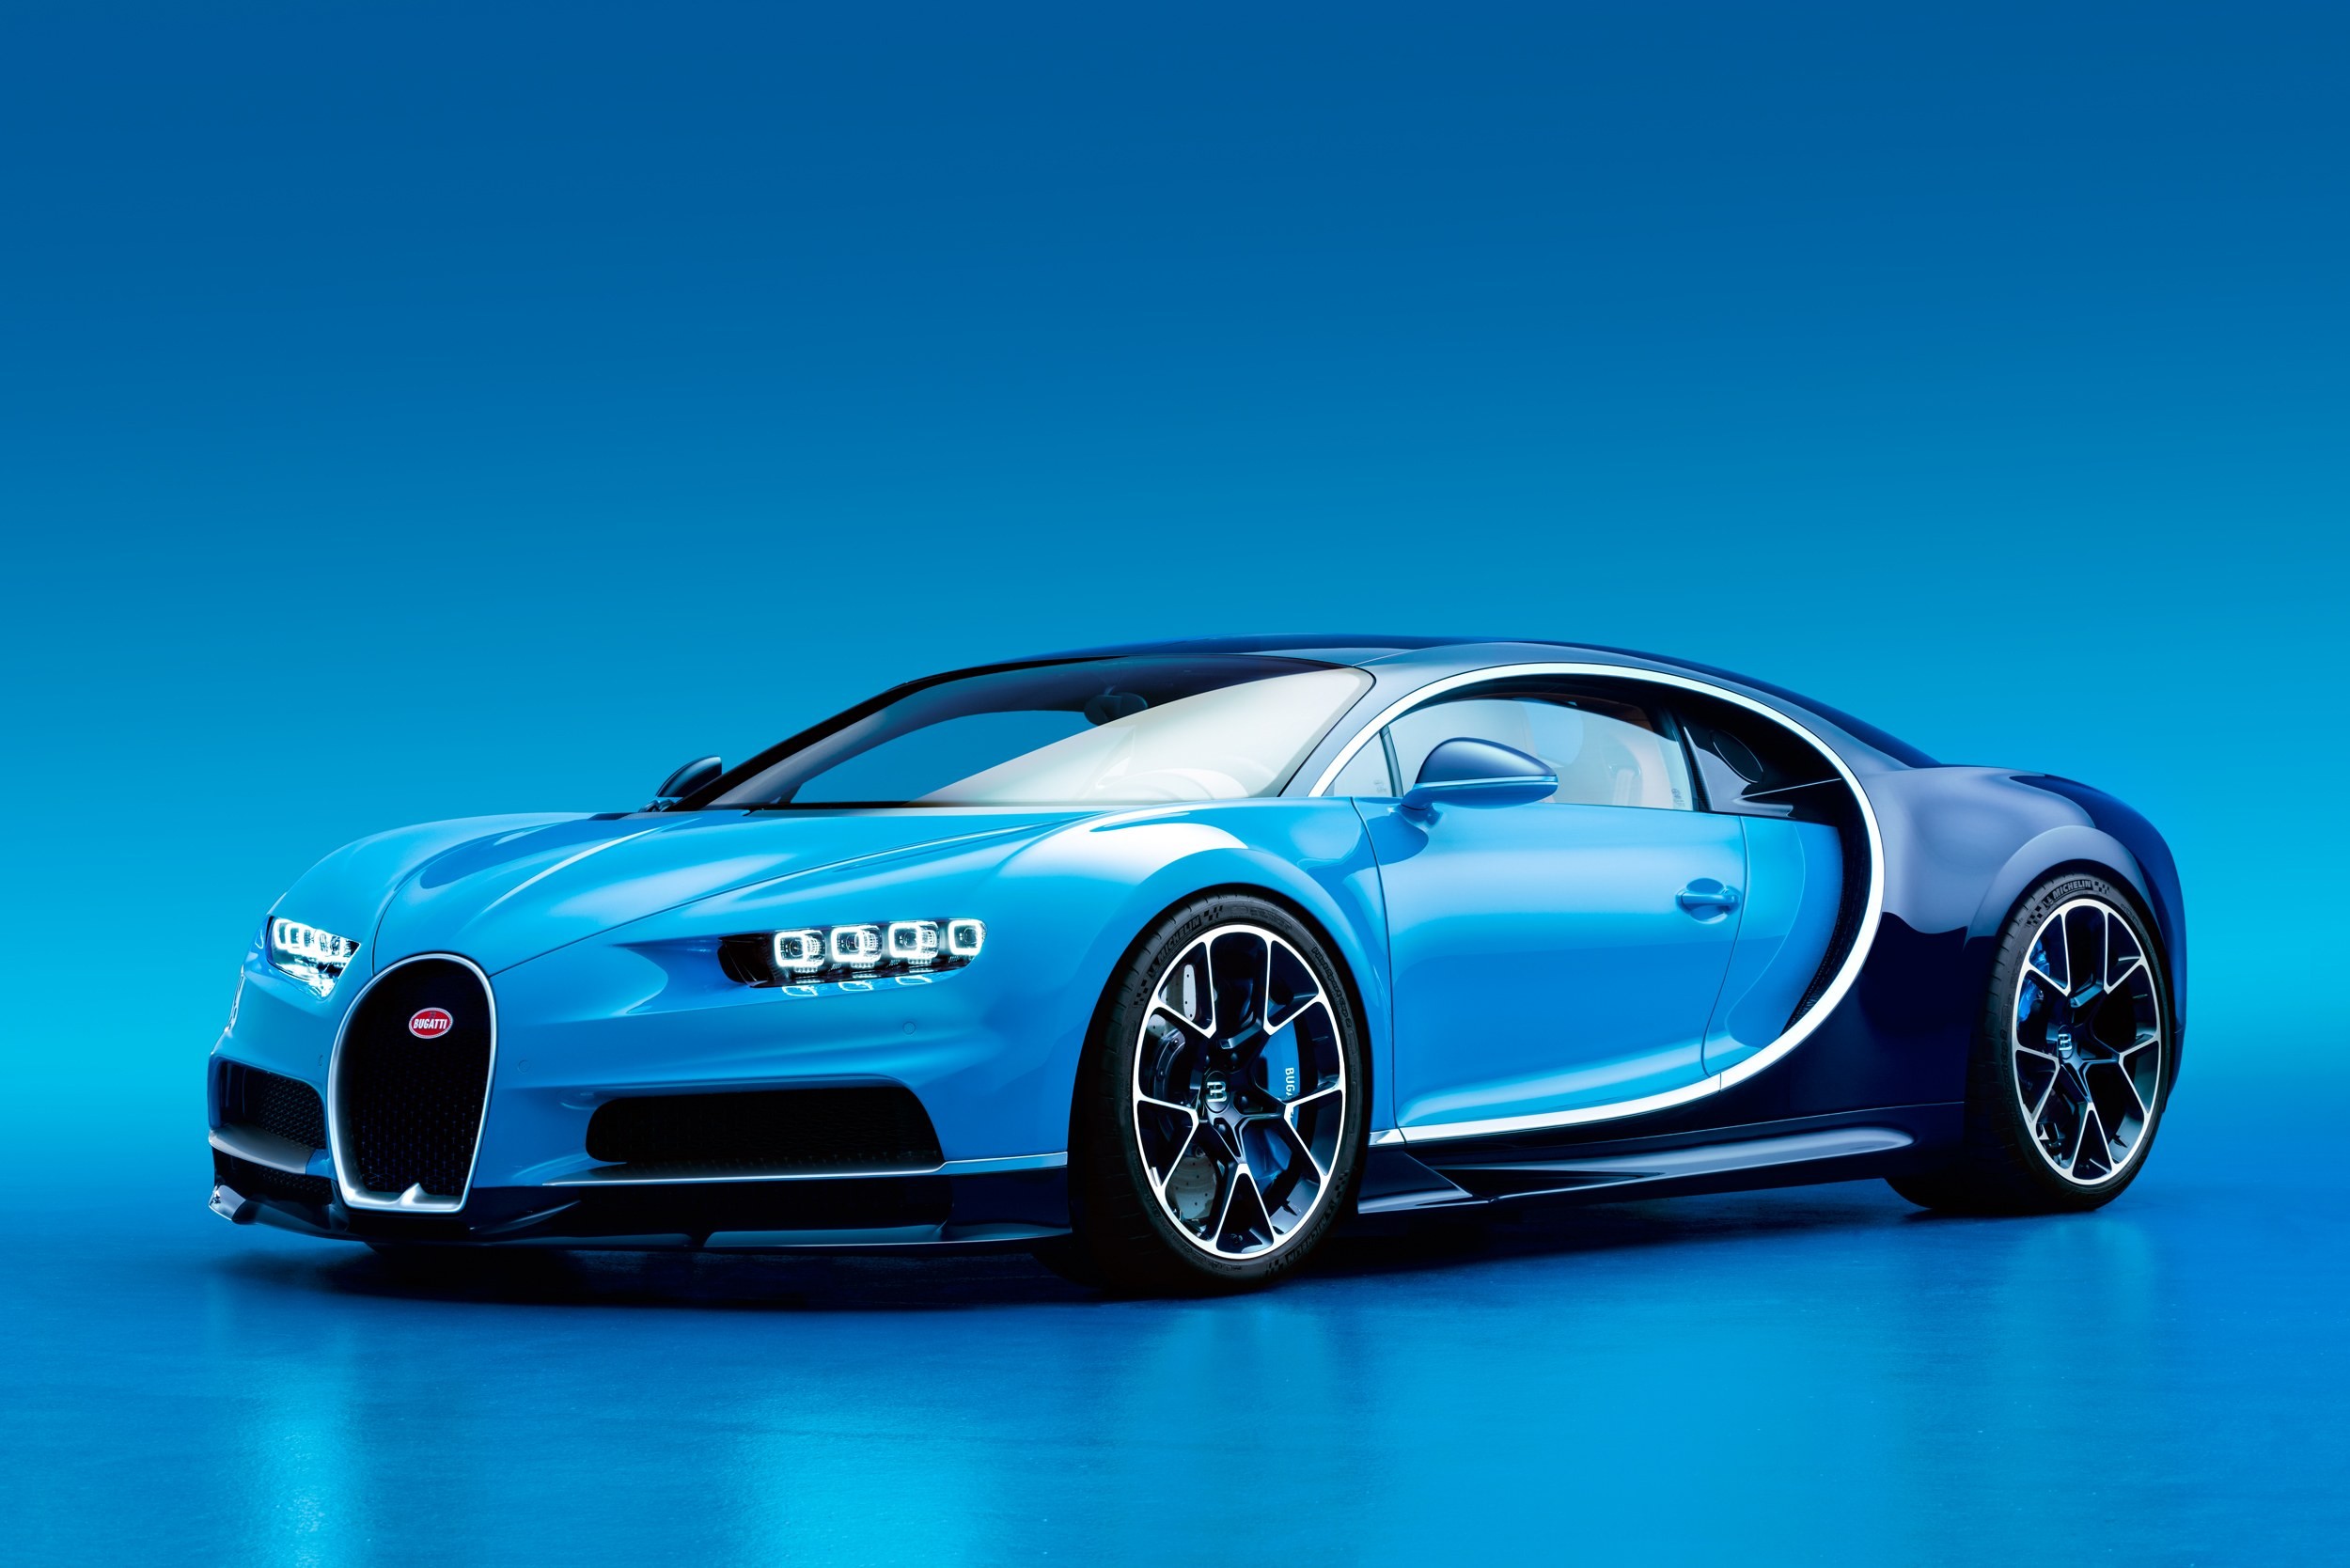 Bugatti Veyron Engine Diagram How Bugatti Crafted the Chiron the World S Last Truly Great Car Of Bugatti Veyron Engine Diagram